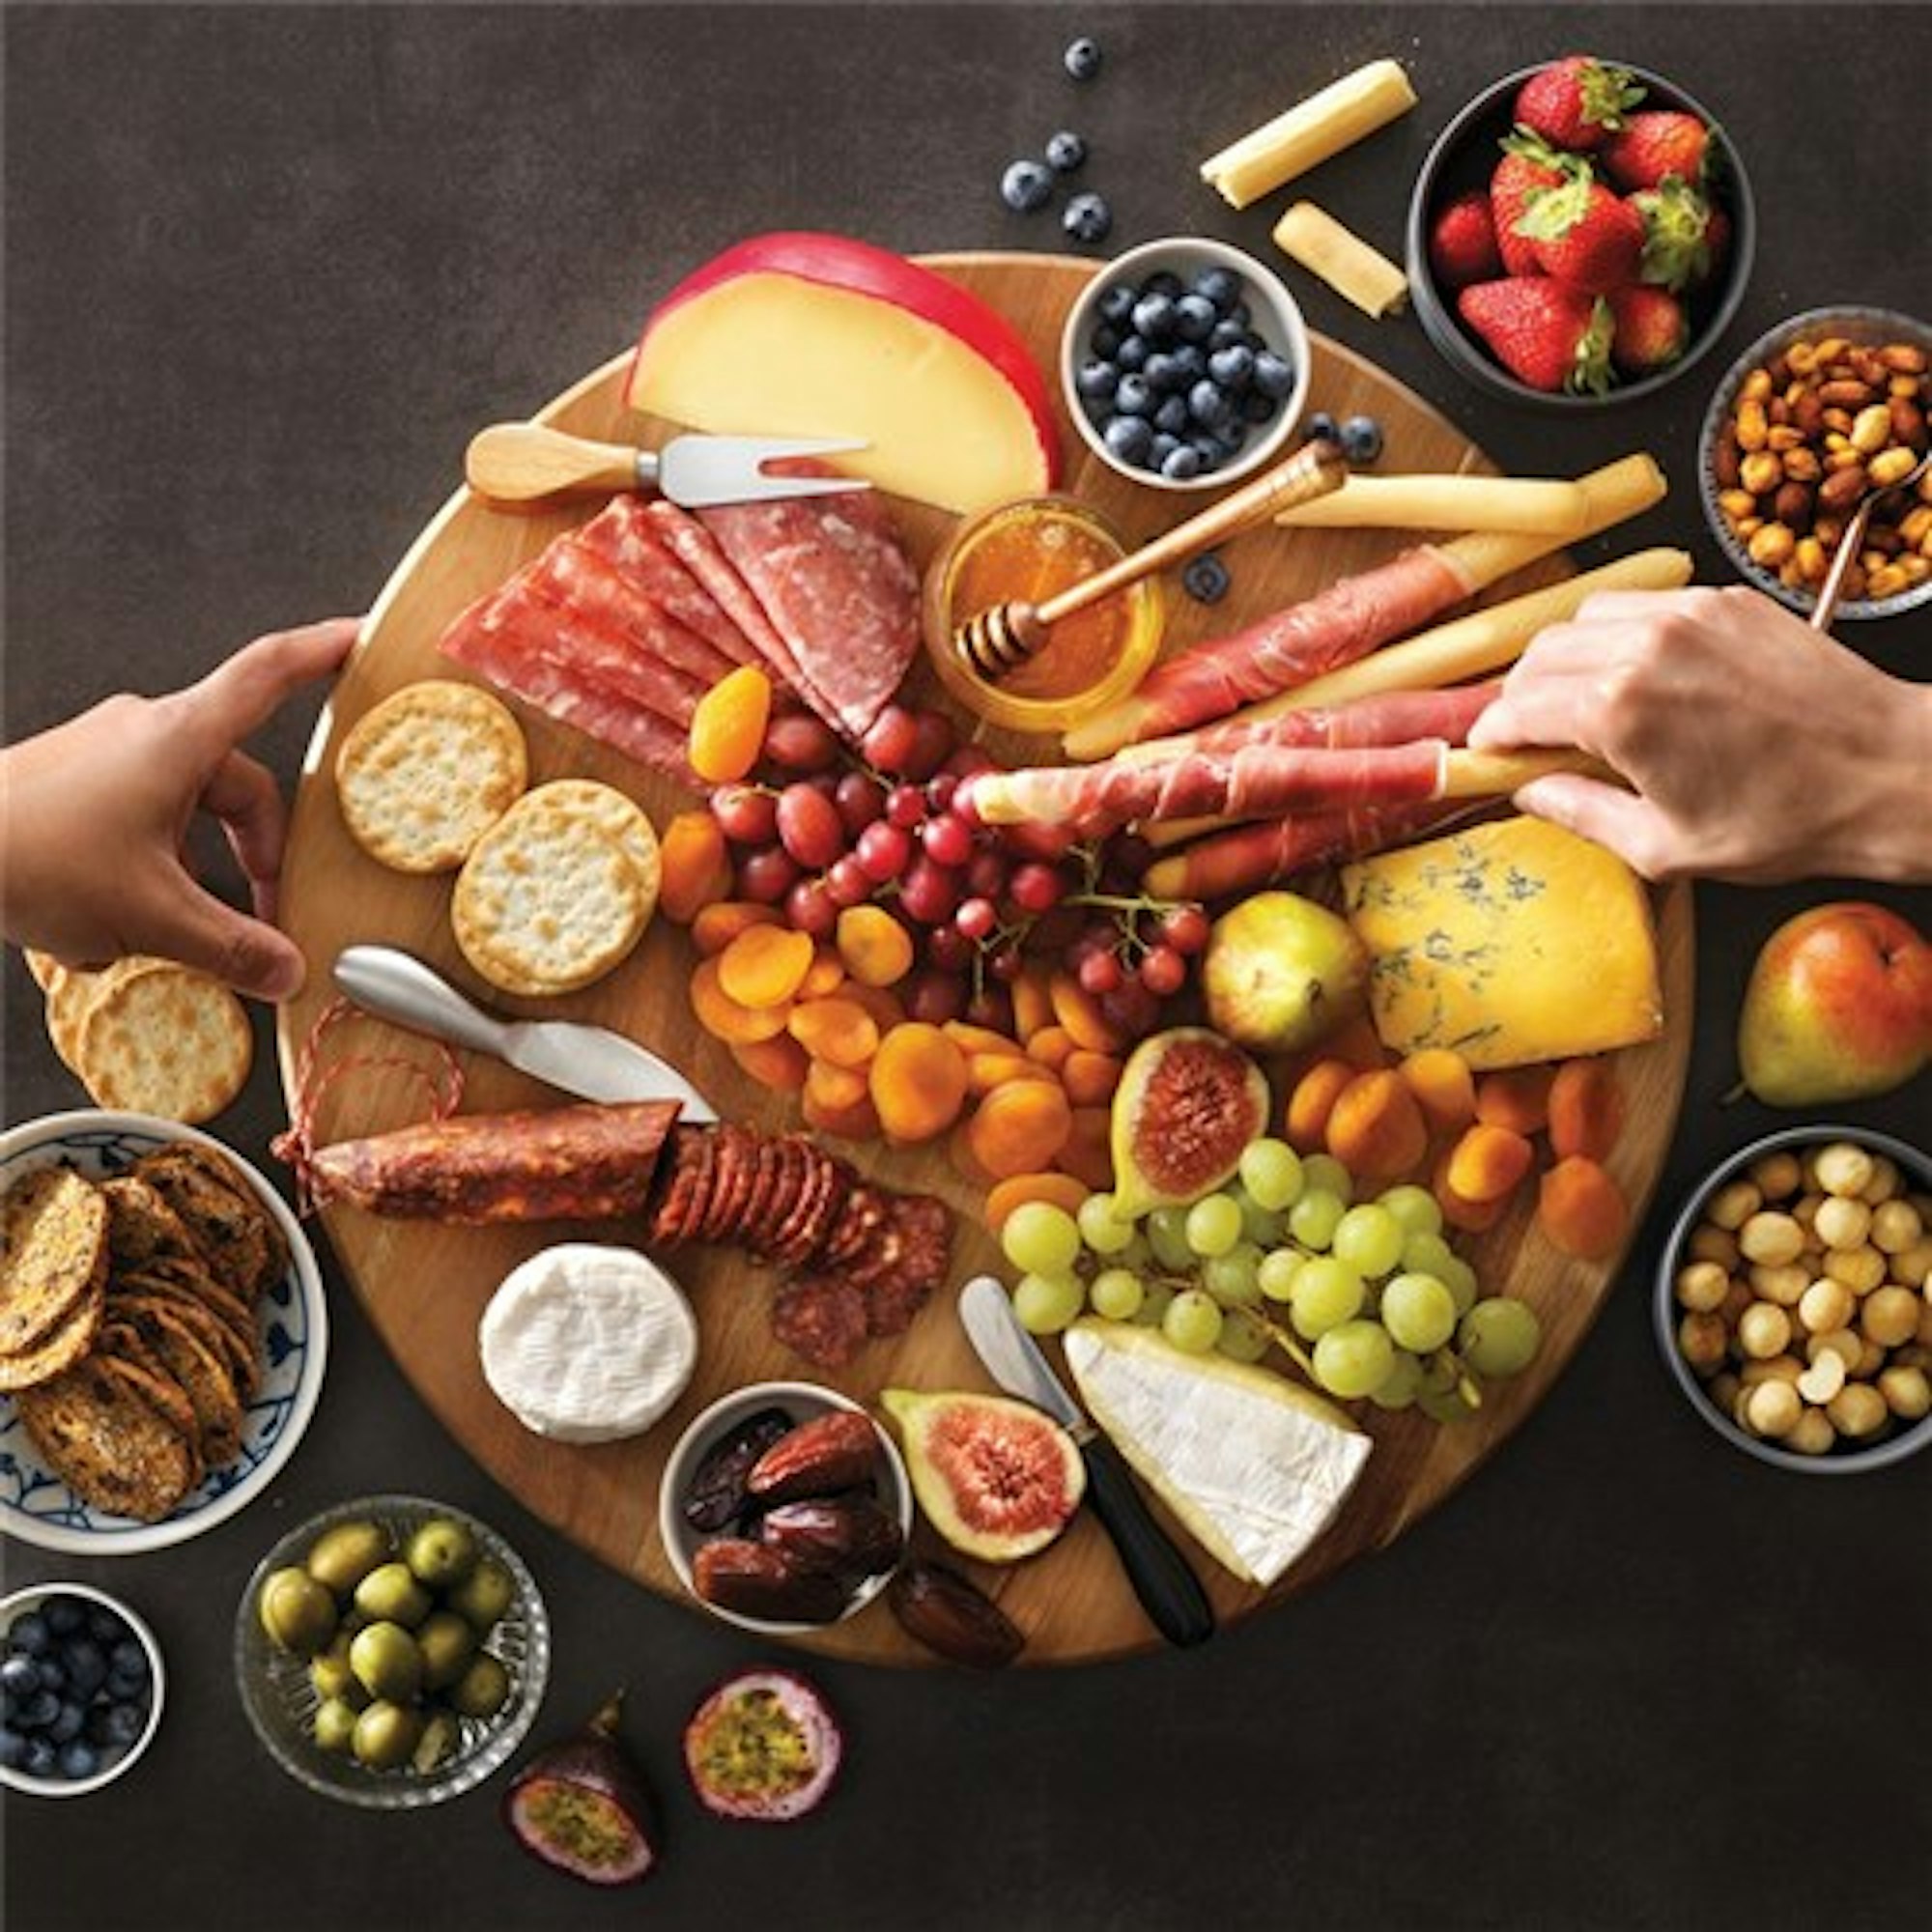 Round grazing platter board filled with charcuterrie cheese, meats and fruits